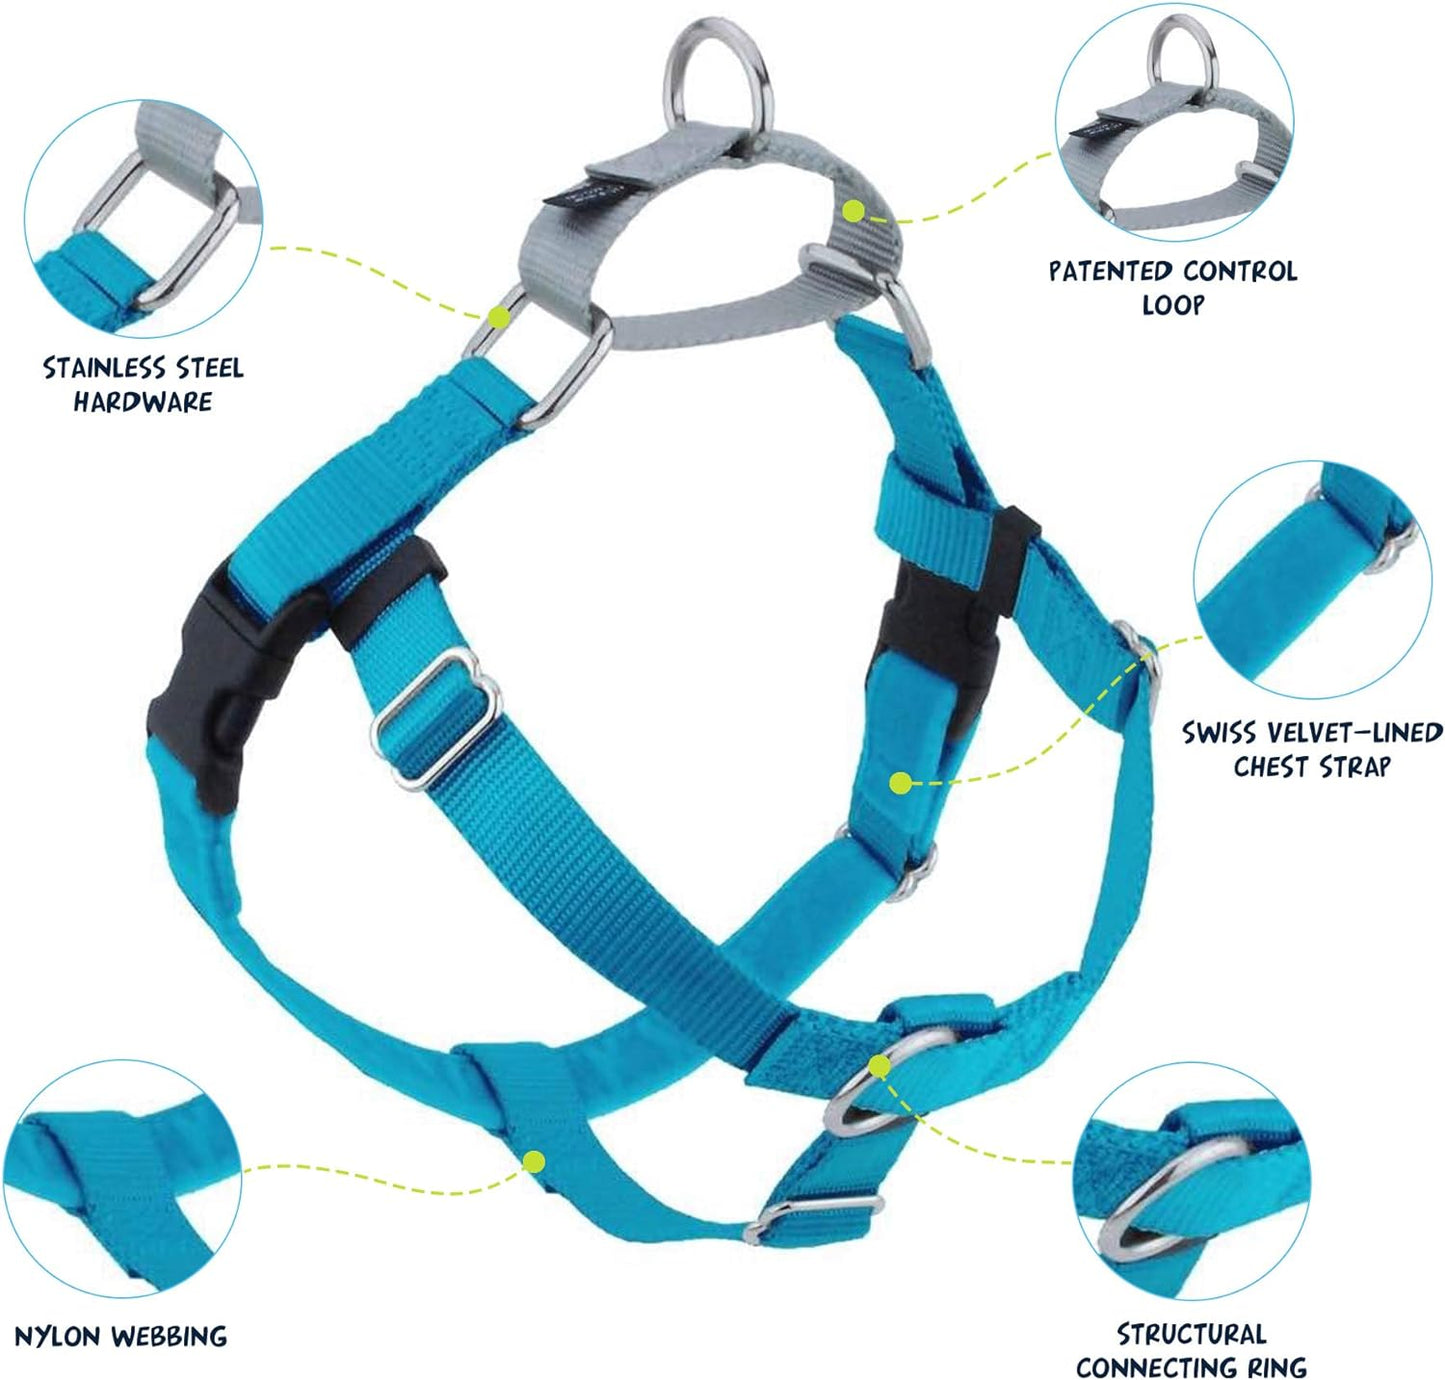 2 Hounds Design Freedom No Pull Dog Harness Large Turquoise